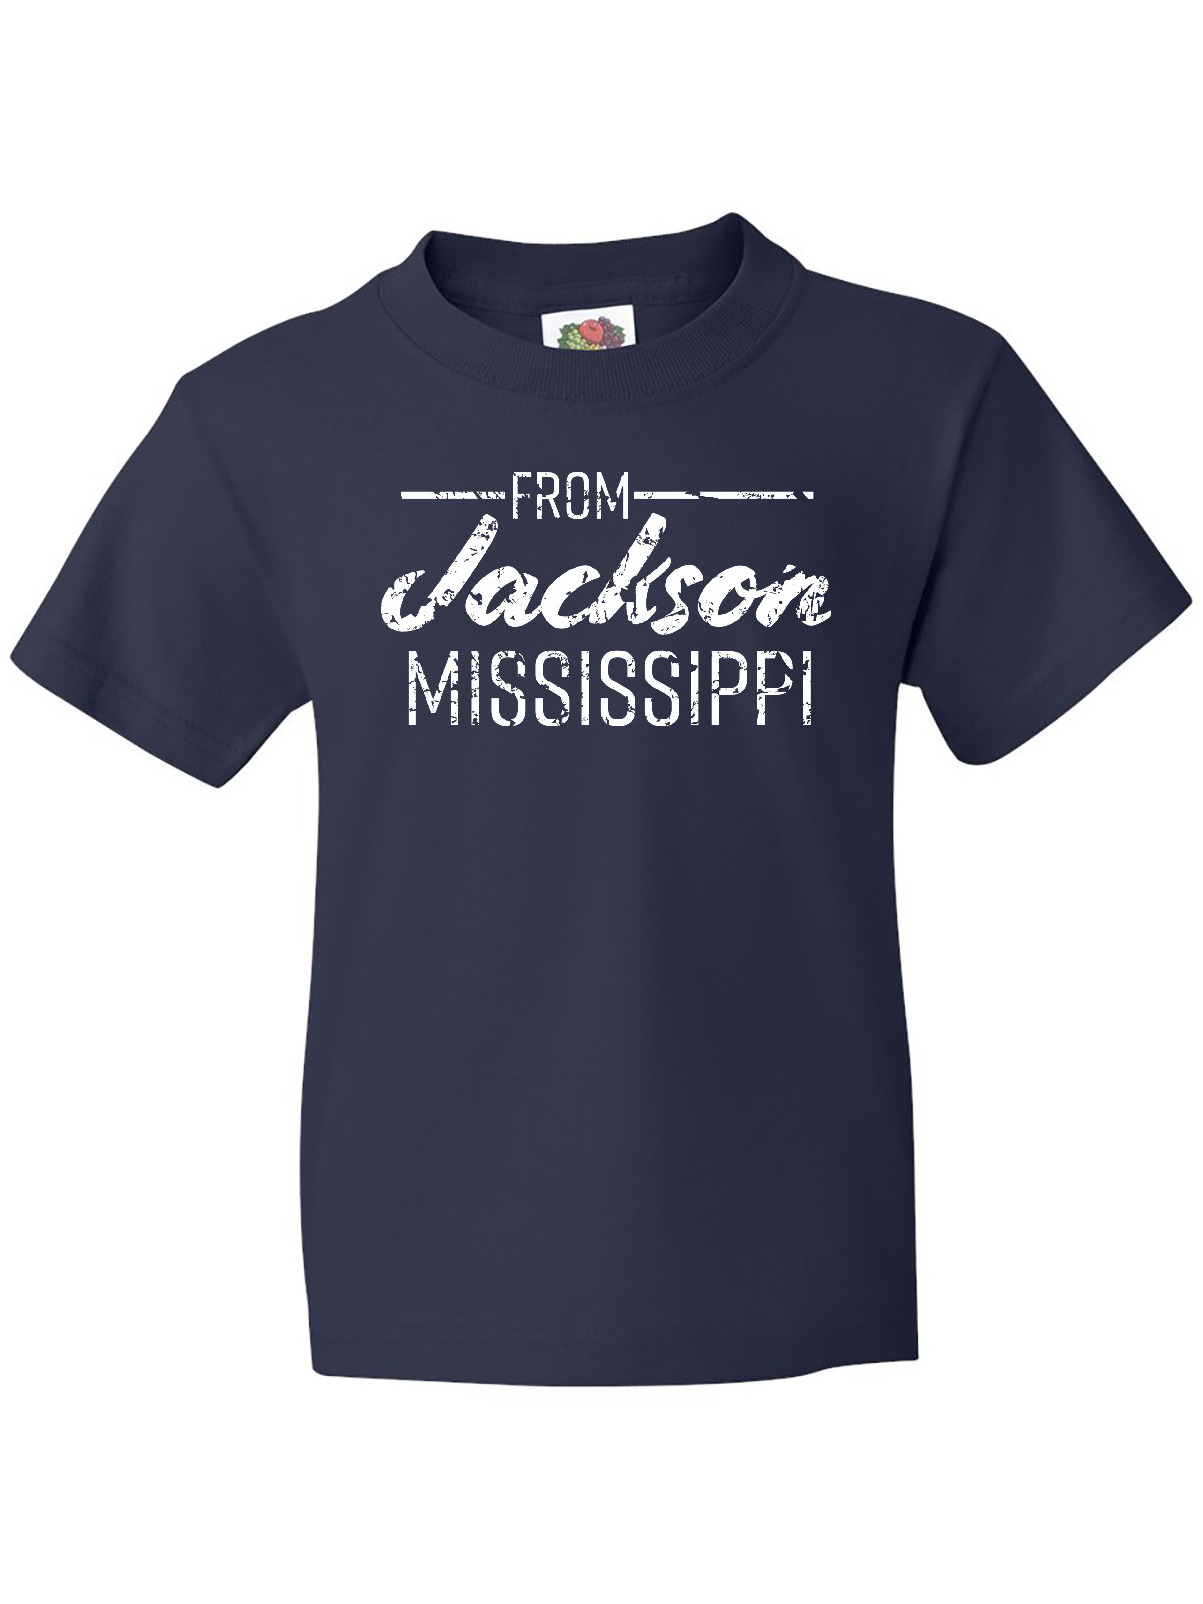 Inktastic From Jackson Mississippi in White Distressed Text Youth T-Shirt - image 1 of 4